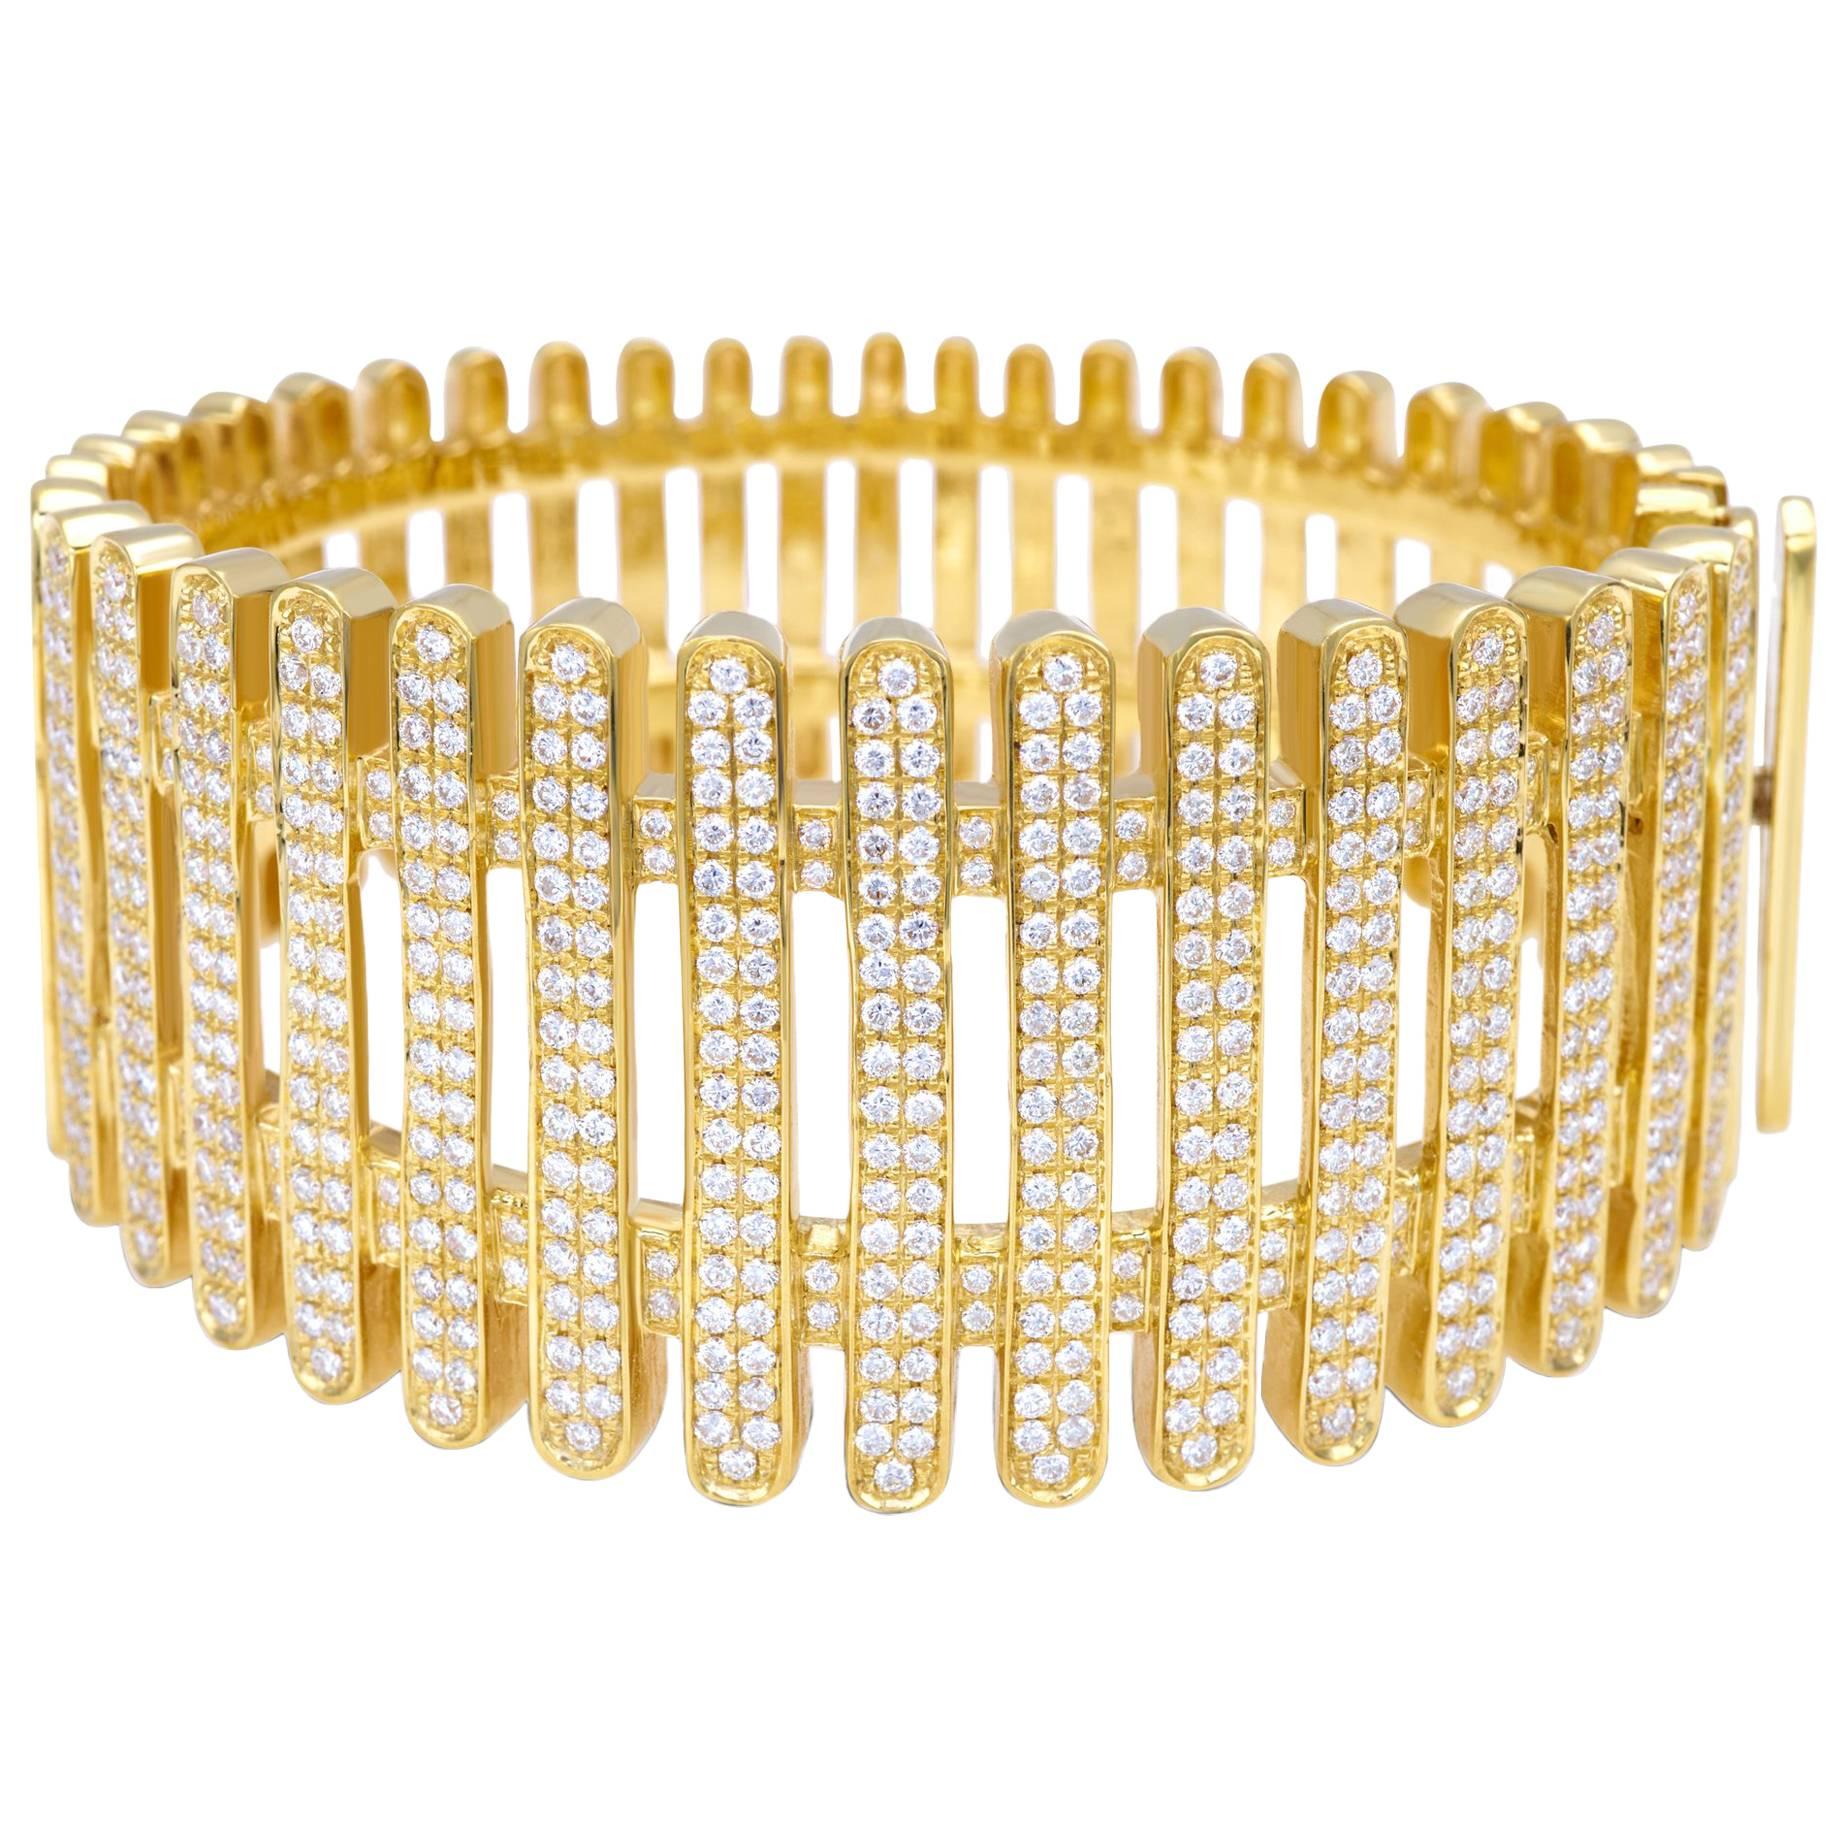 Bangle from the Collection "Moonlight" 18 Karat Yellow Gold and Diamonds For Sale